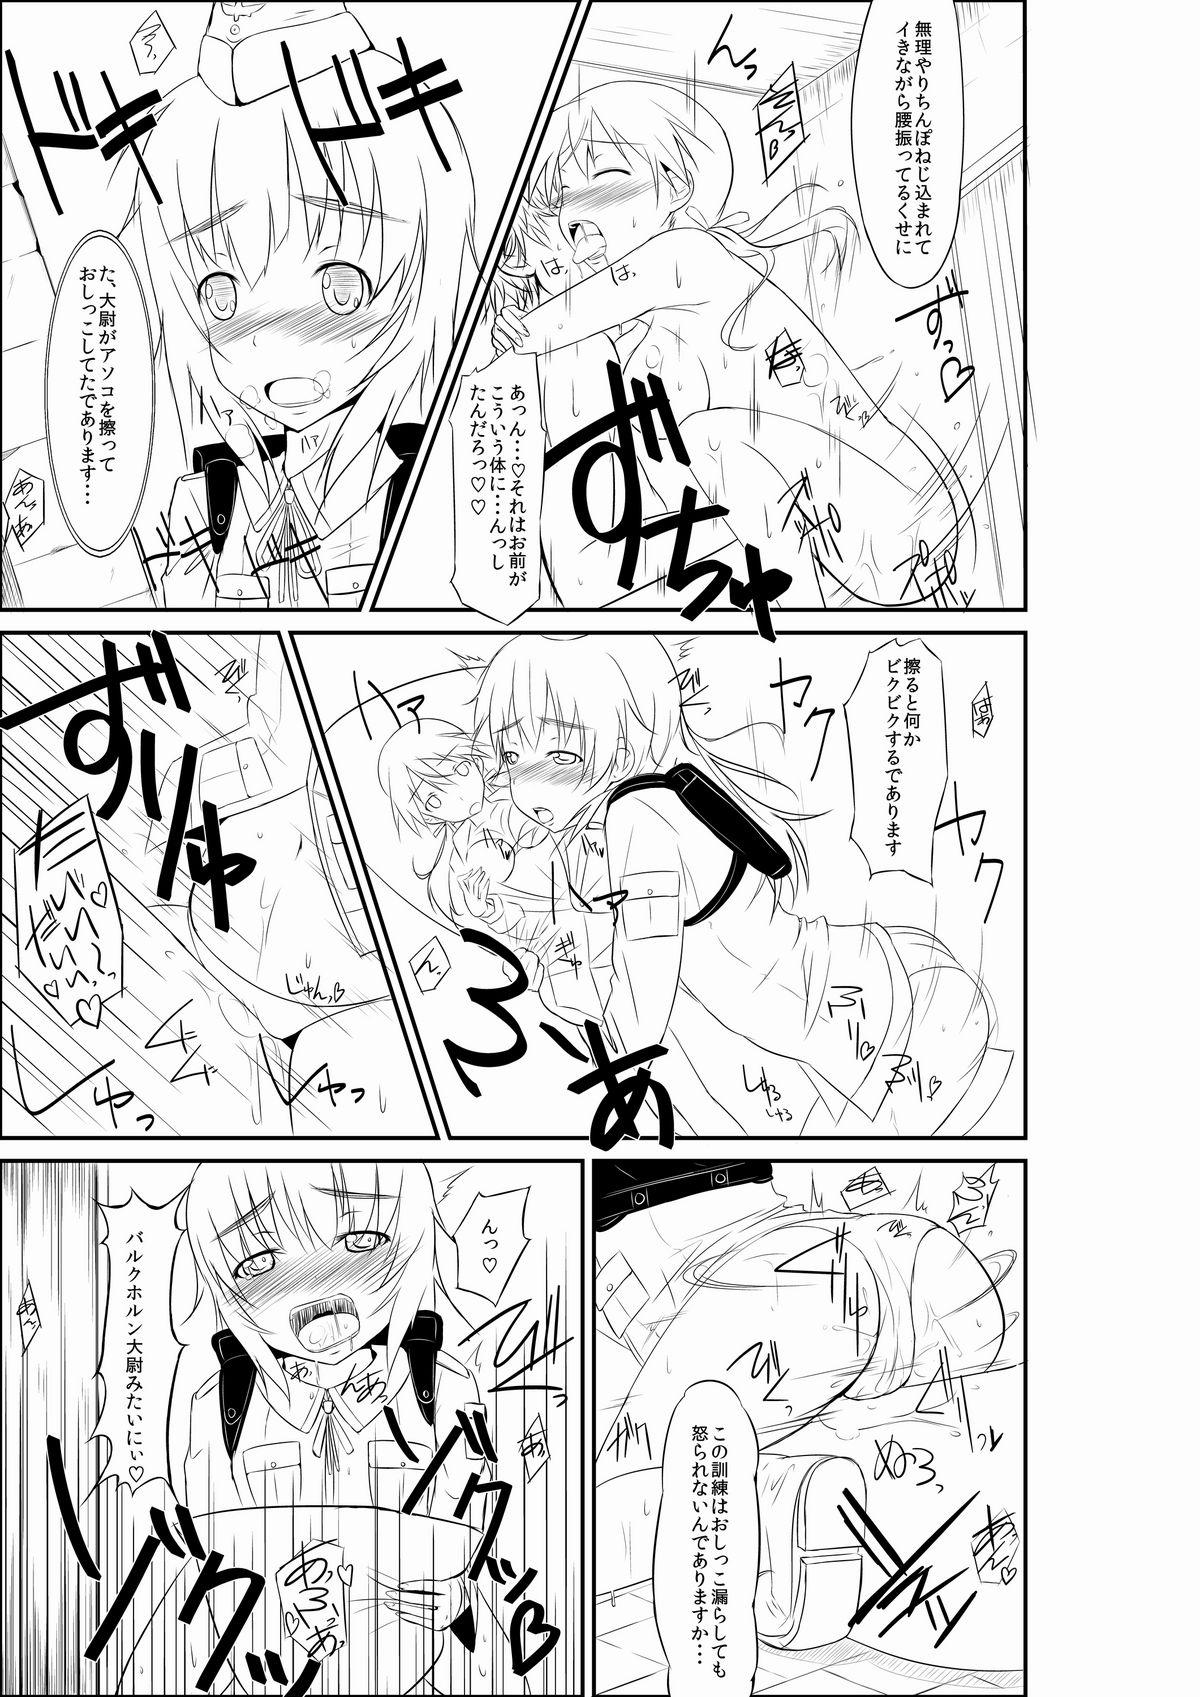 Beach 練習 お姉ちゃんとヘルマちゃん - Strike witches Amateur Cumshots - Page 7